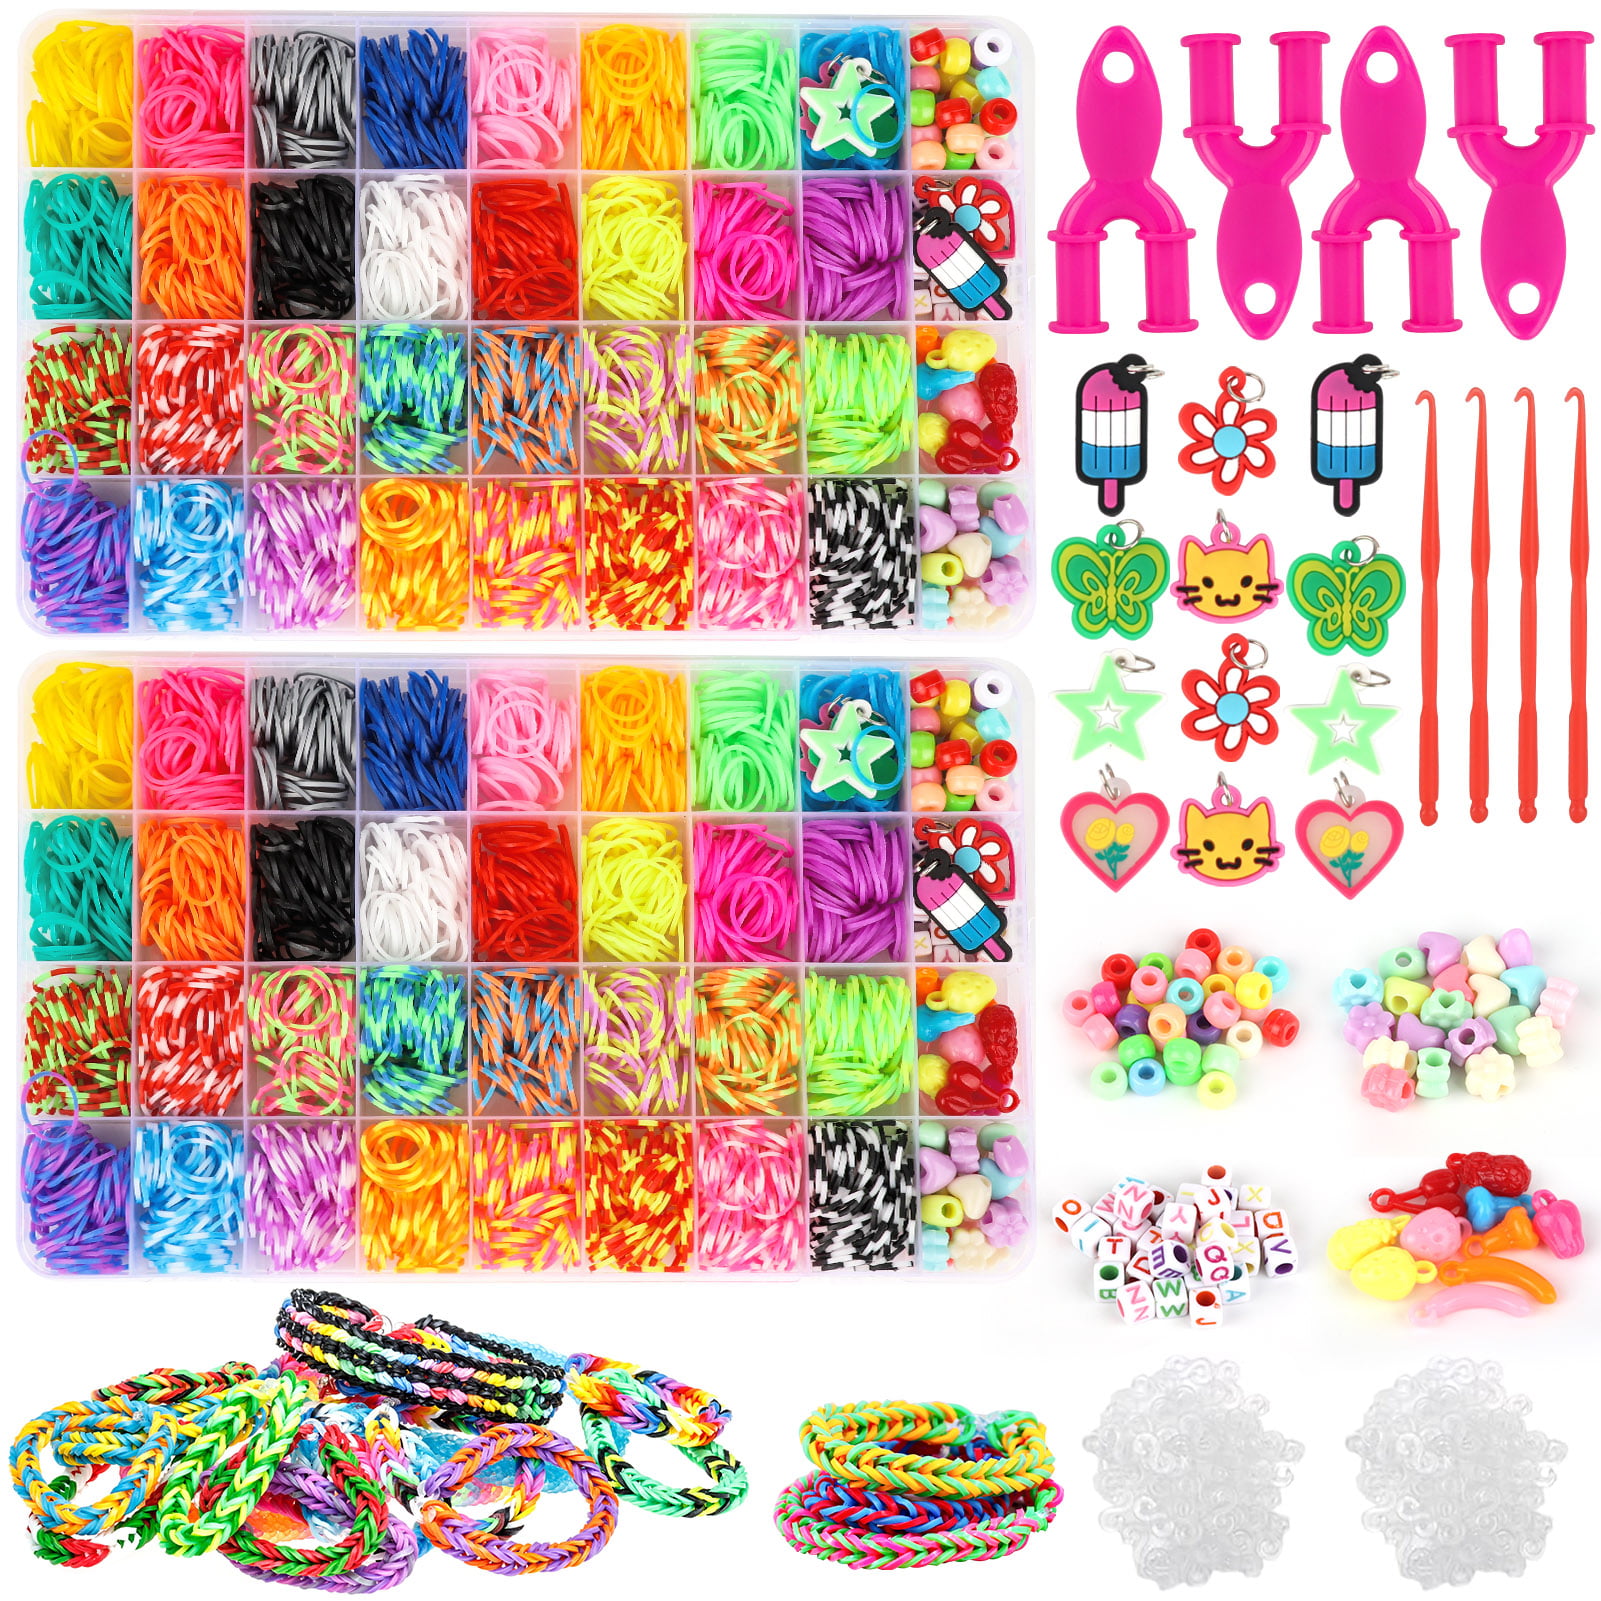 Loom Bands Kit Rainbow Bands Twister Case Kit Box with 10,000 Elastic Rubber 